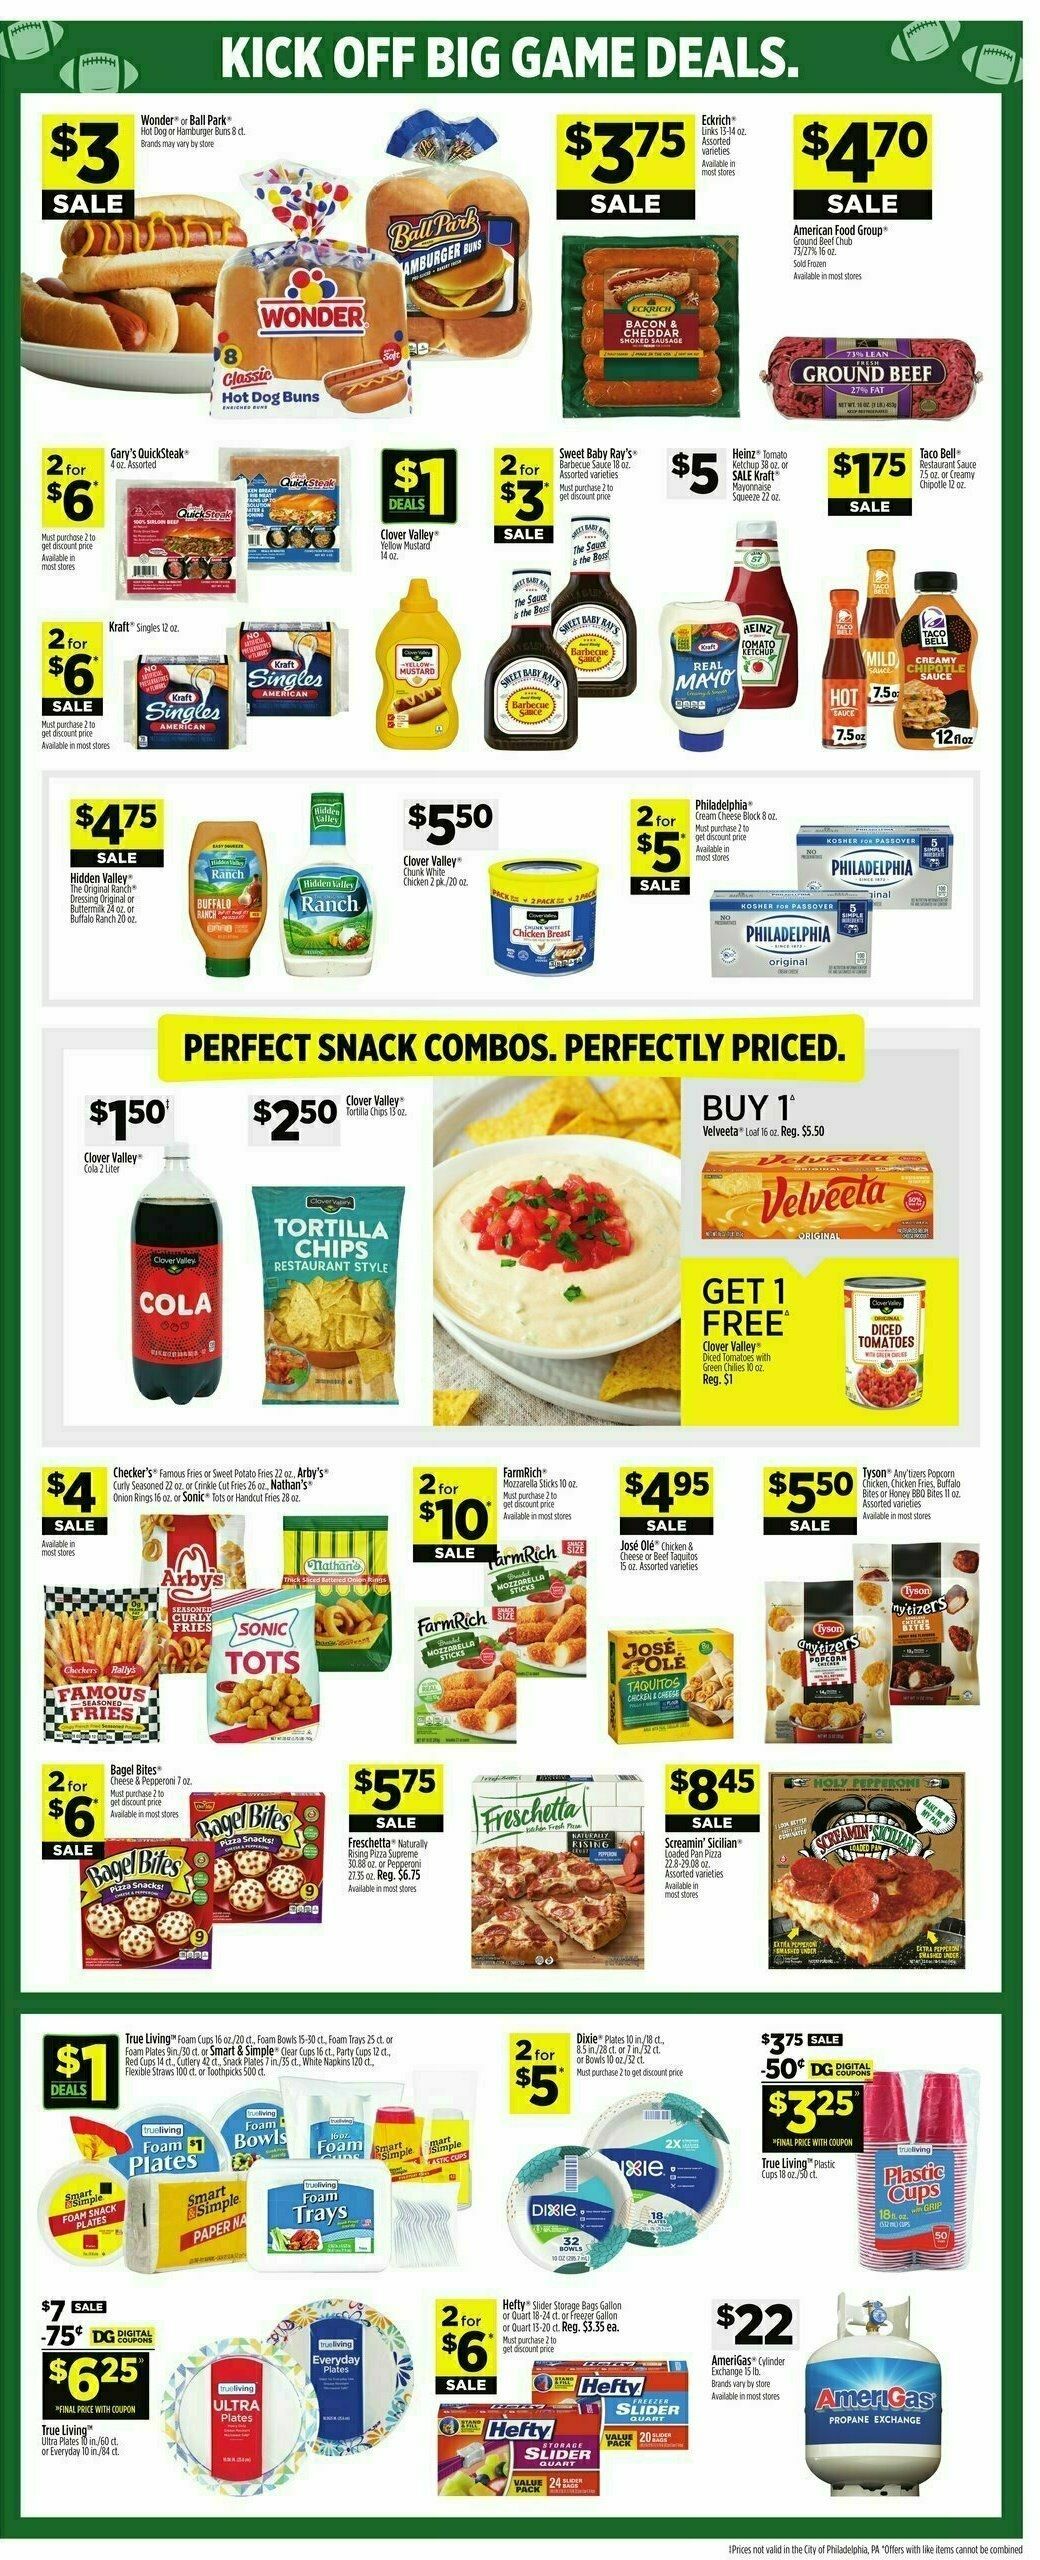 Dollar General Weekly Ad from February 4